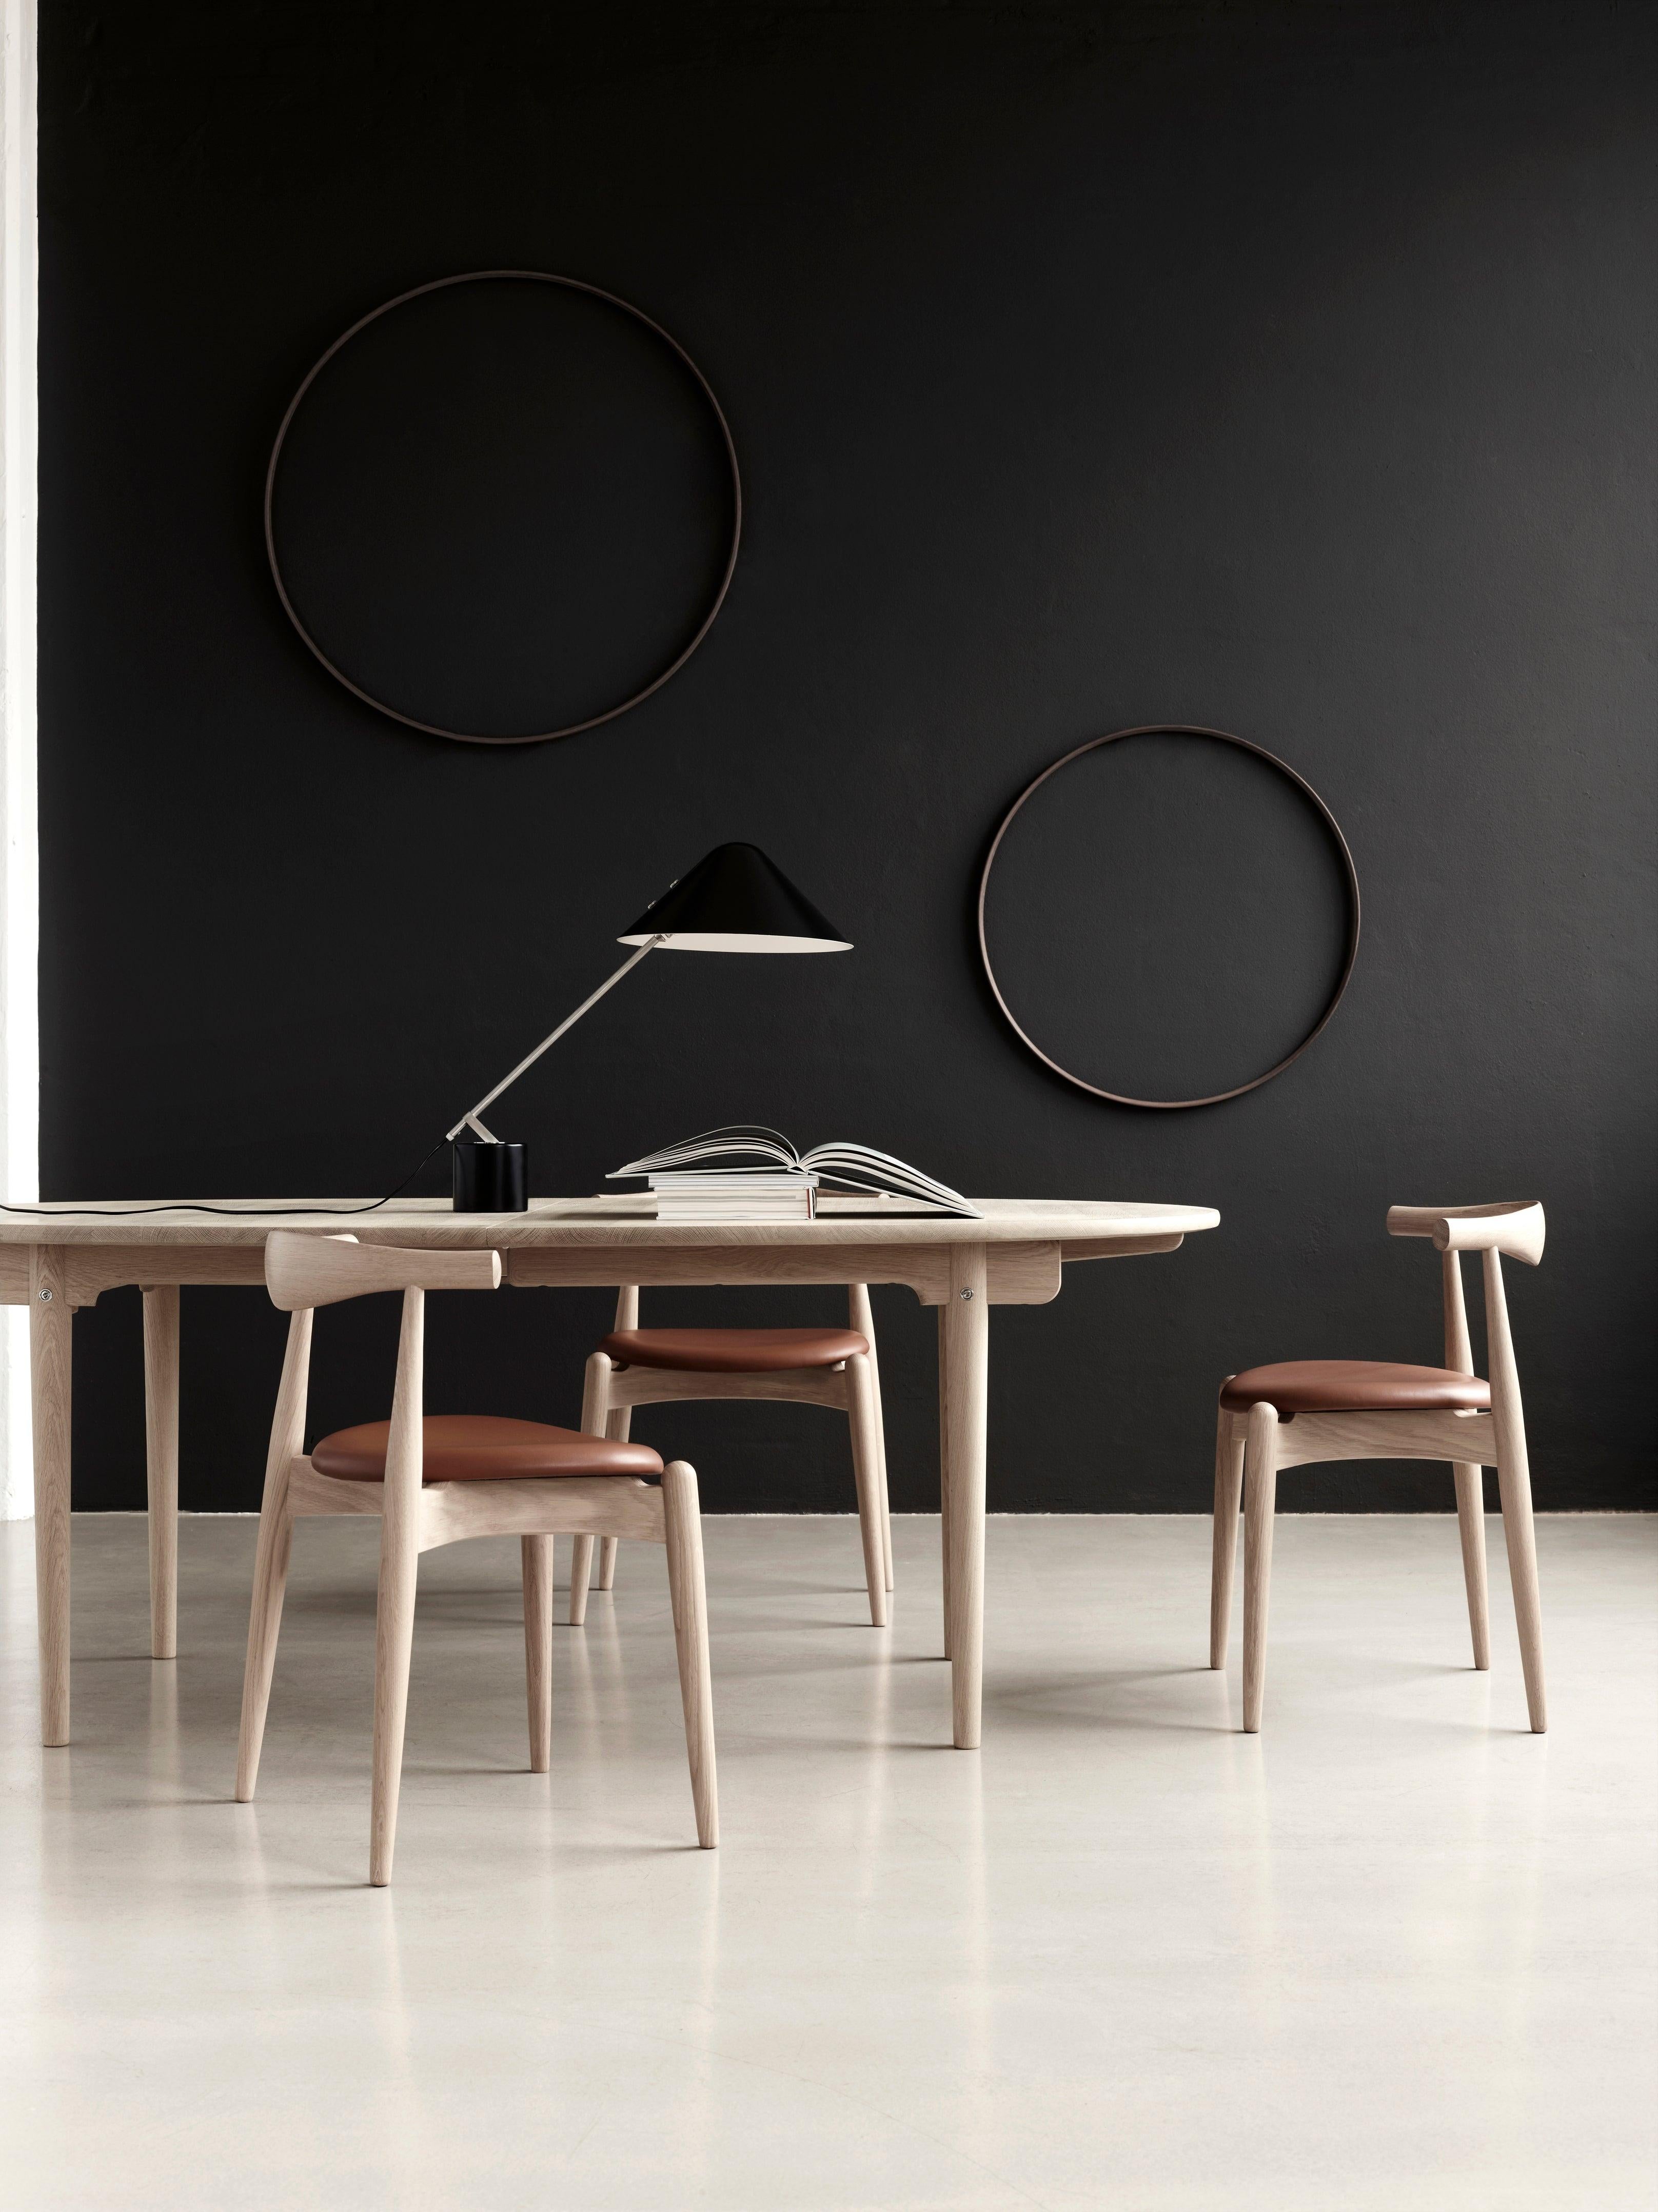 When Carl Hansen & SÃ¸n put the CH20 Elbow chair by Hans J. Wegner into production for the first time in 2005, it quickly established a position as a modern classic, winning the ICFF Editorsâ€™ Award in New York in the same year. The Elbow chairâ€™s